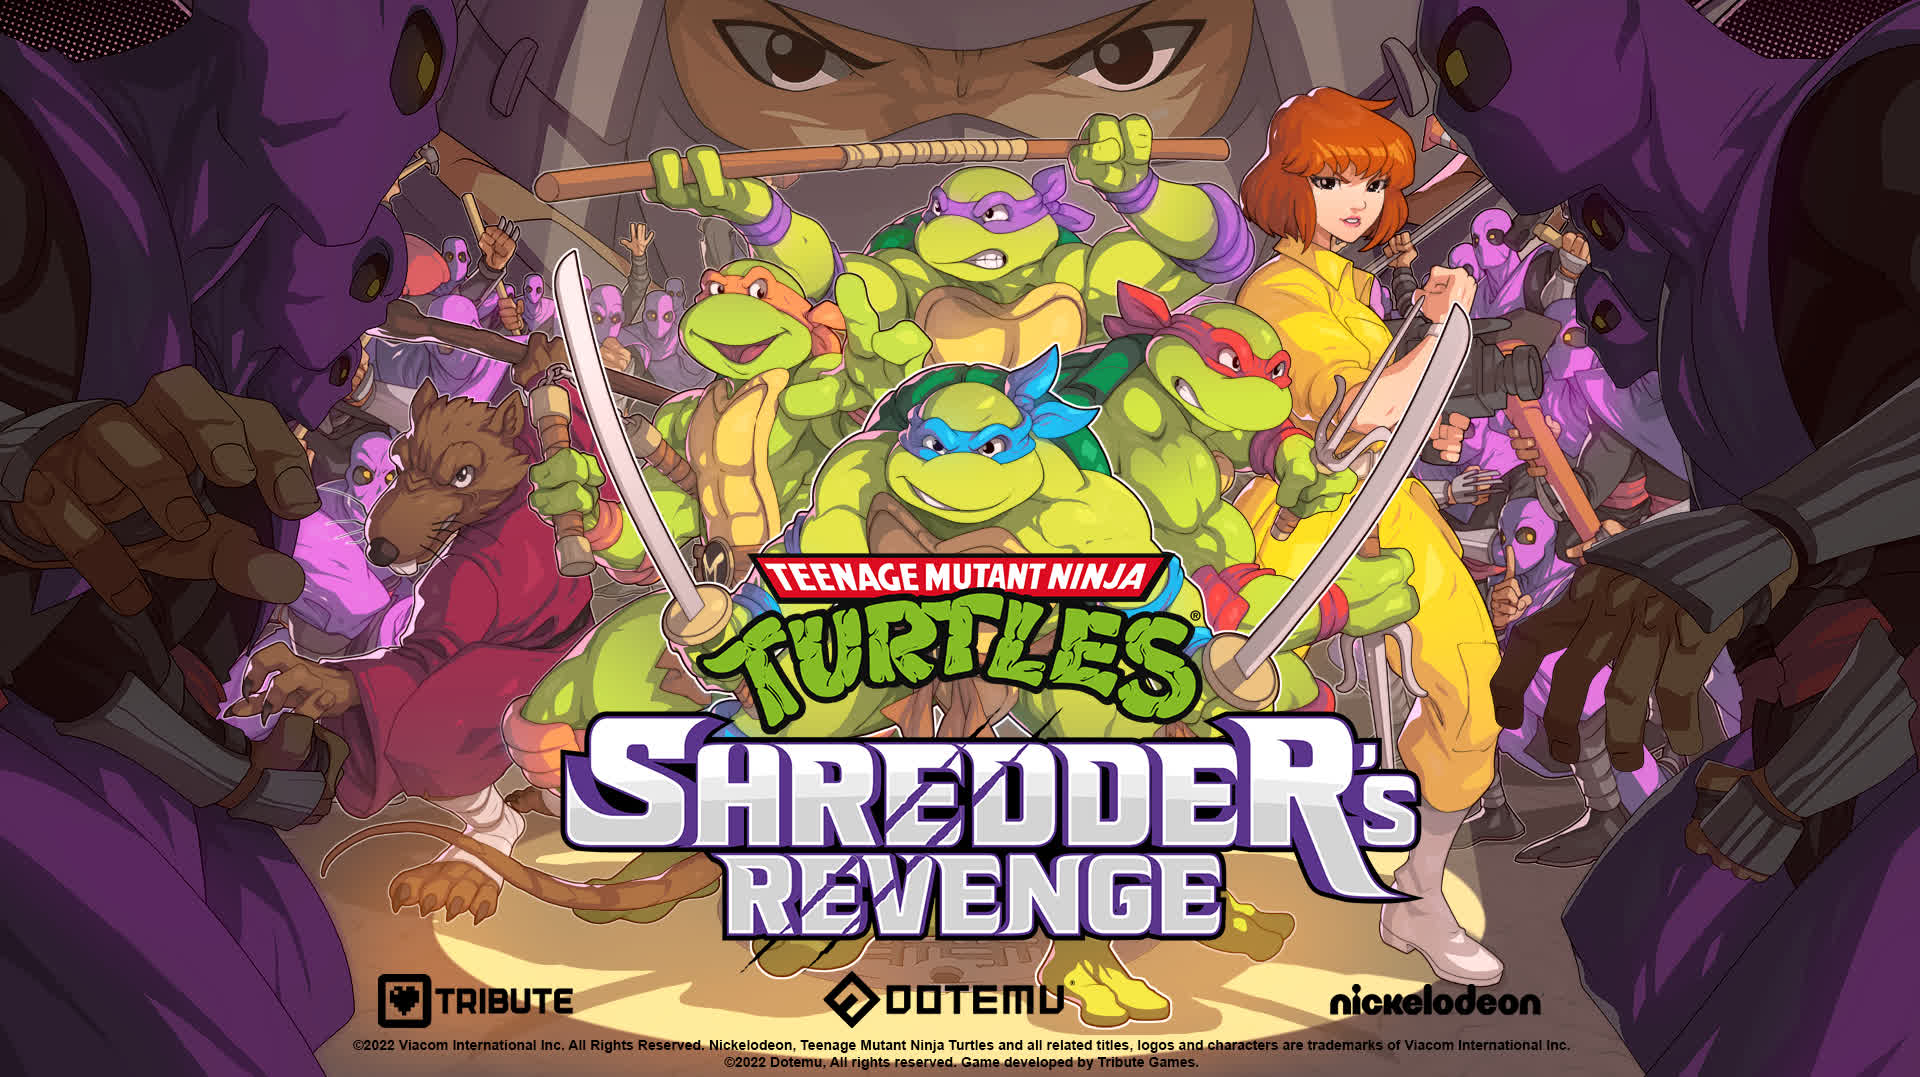 TMNT: Shredder's Revenge launches this summer with the original Turtles' voice actors